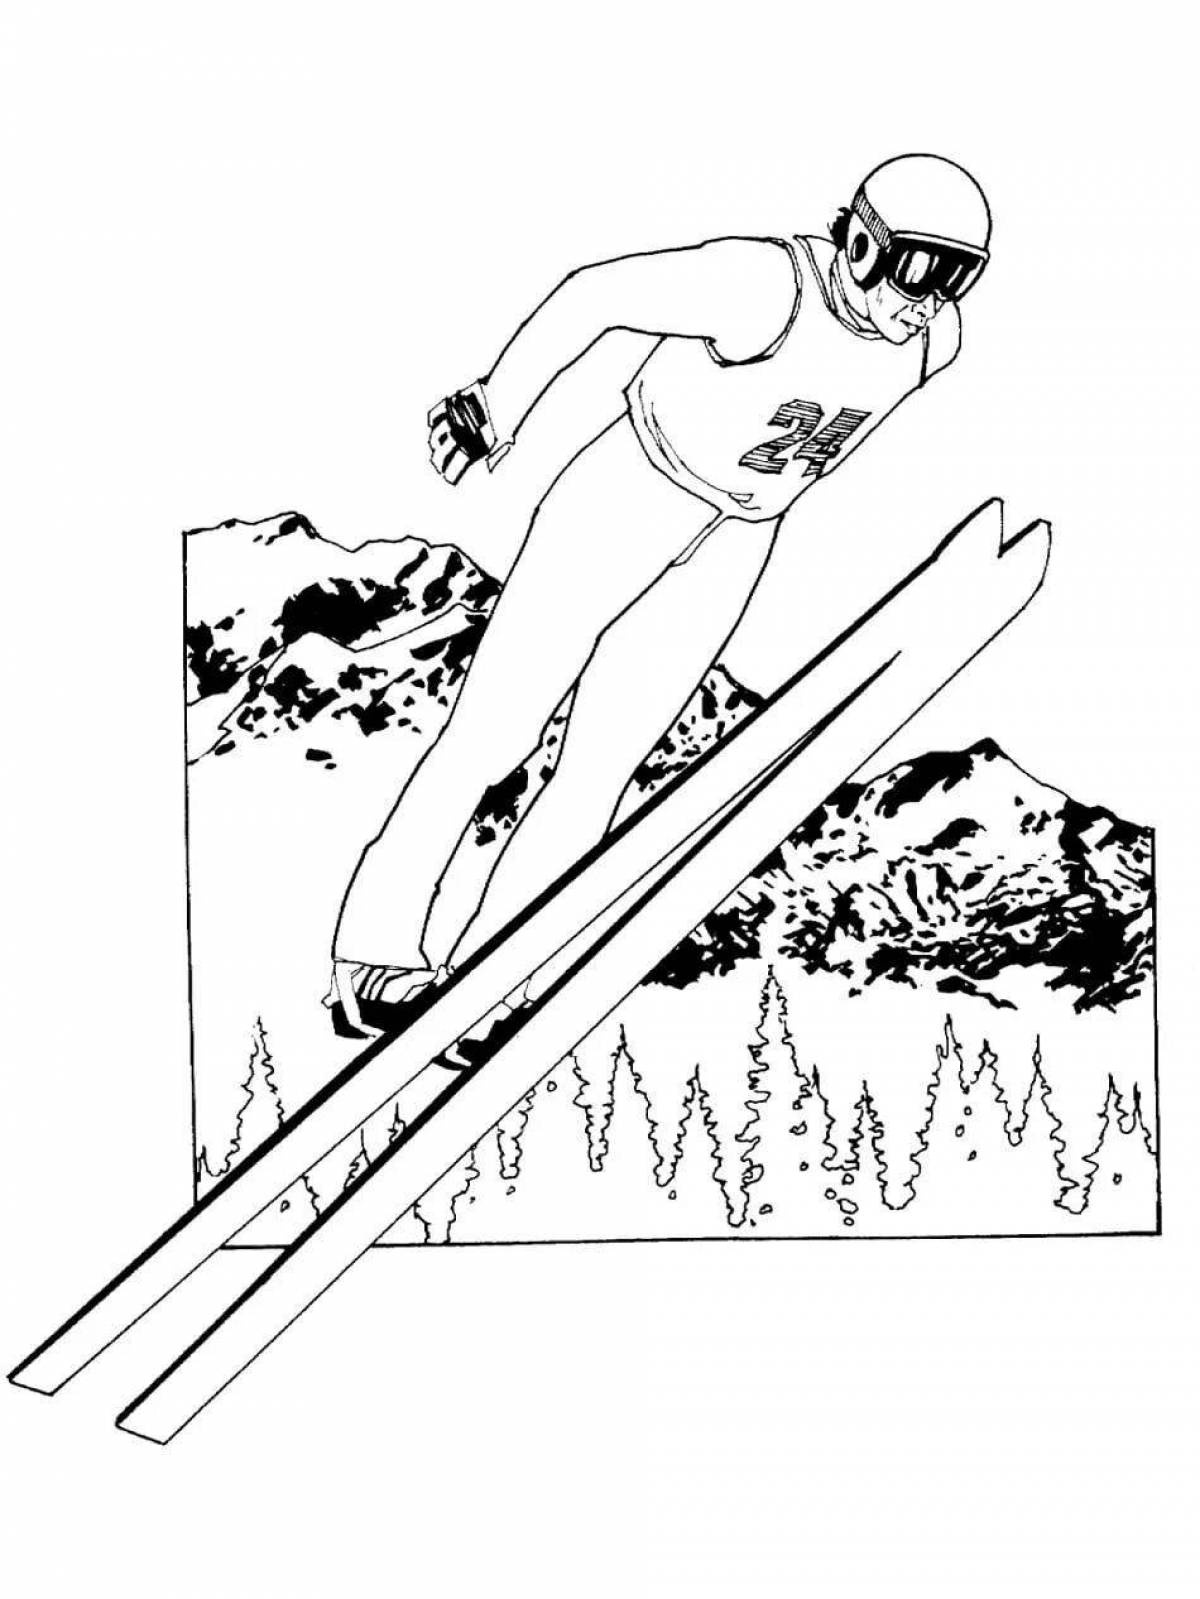 Coloring page energetic skiing